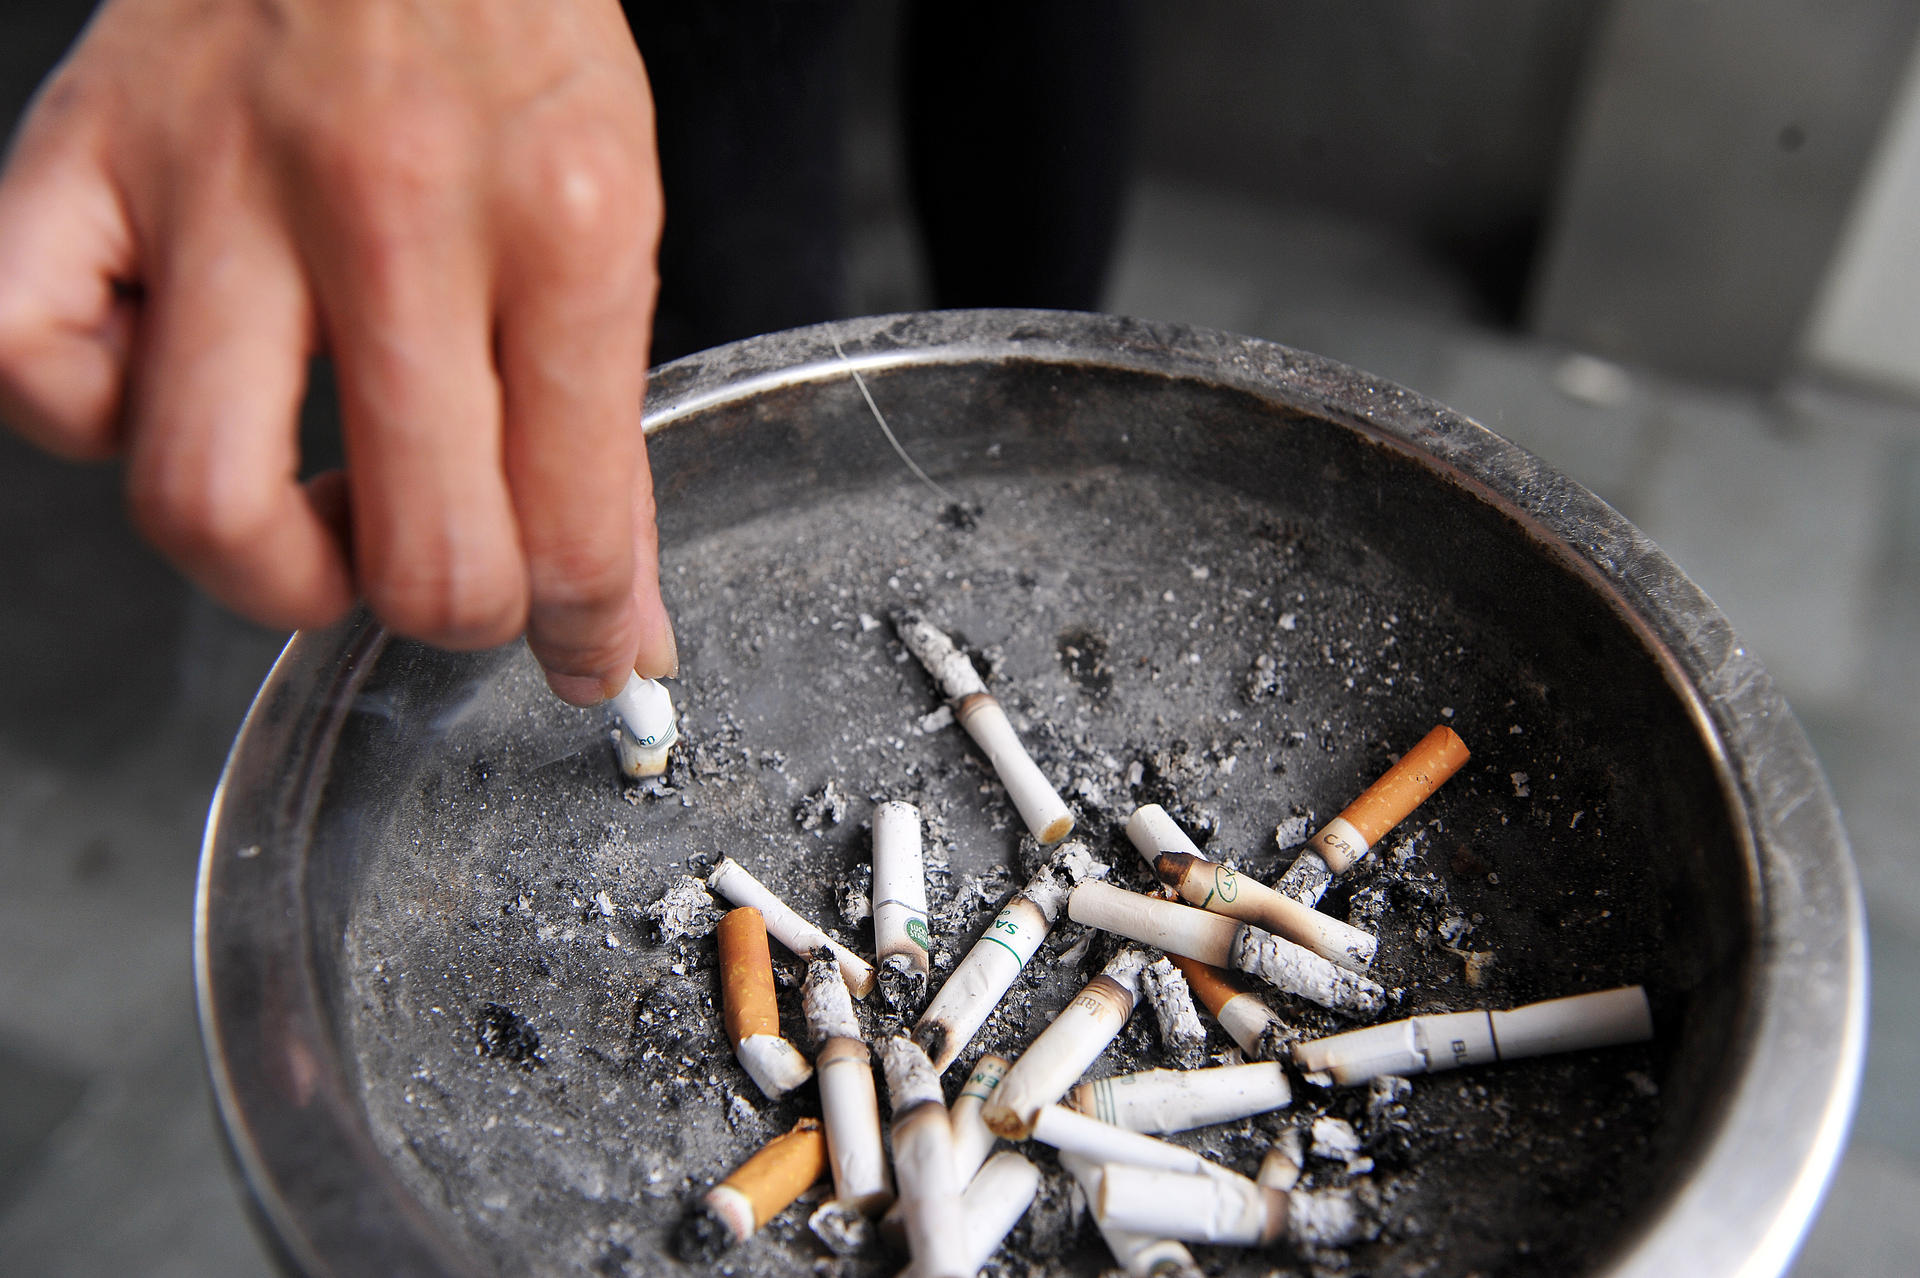 High levels of taxation are recommended by the World Health Organisation as the most effective way of discouraging people from smoking. Photo: AFP